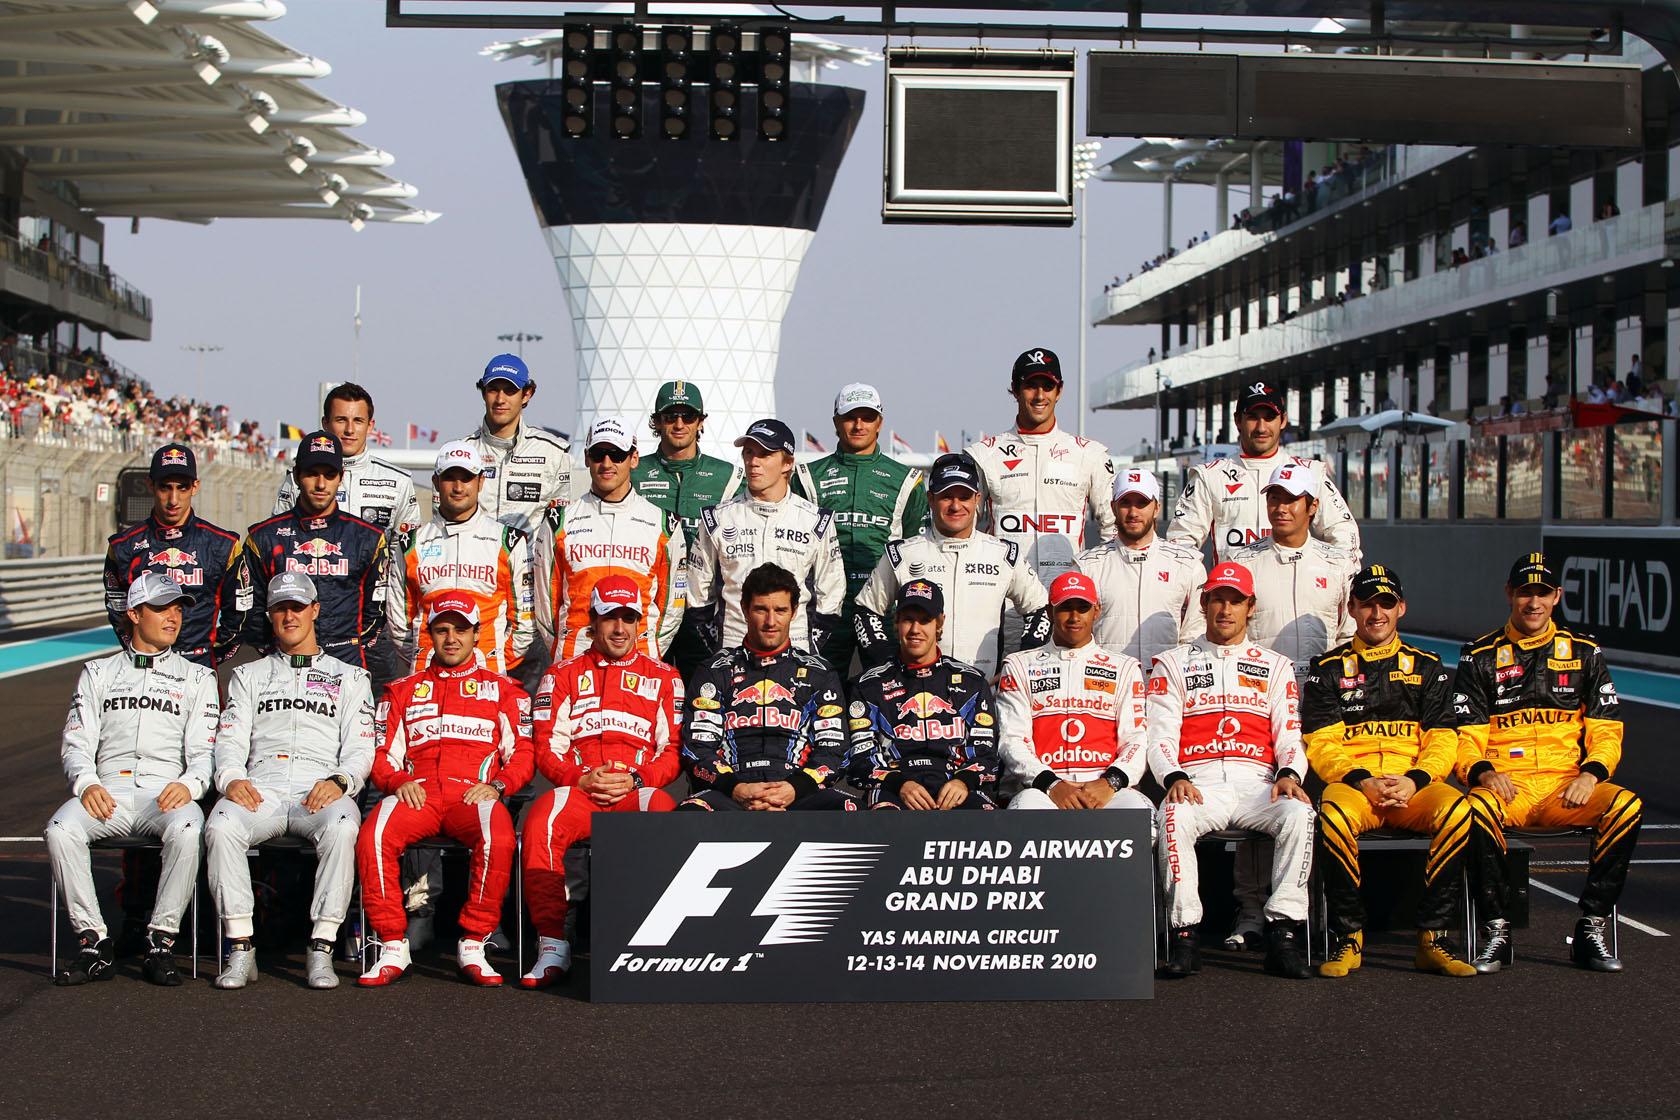 Drivers' And Teams' End Of Season Photographs · RaceFans